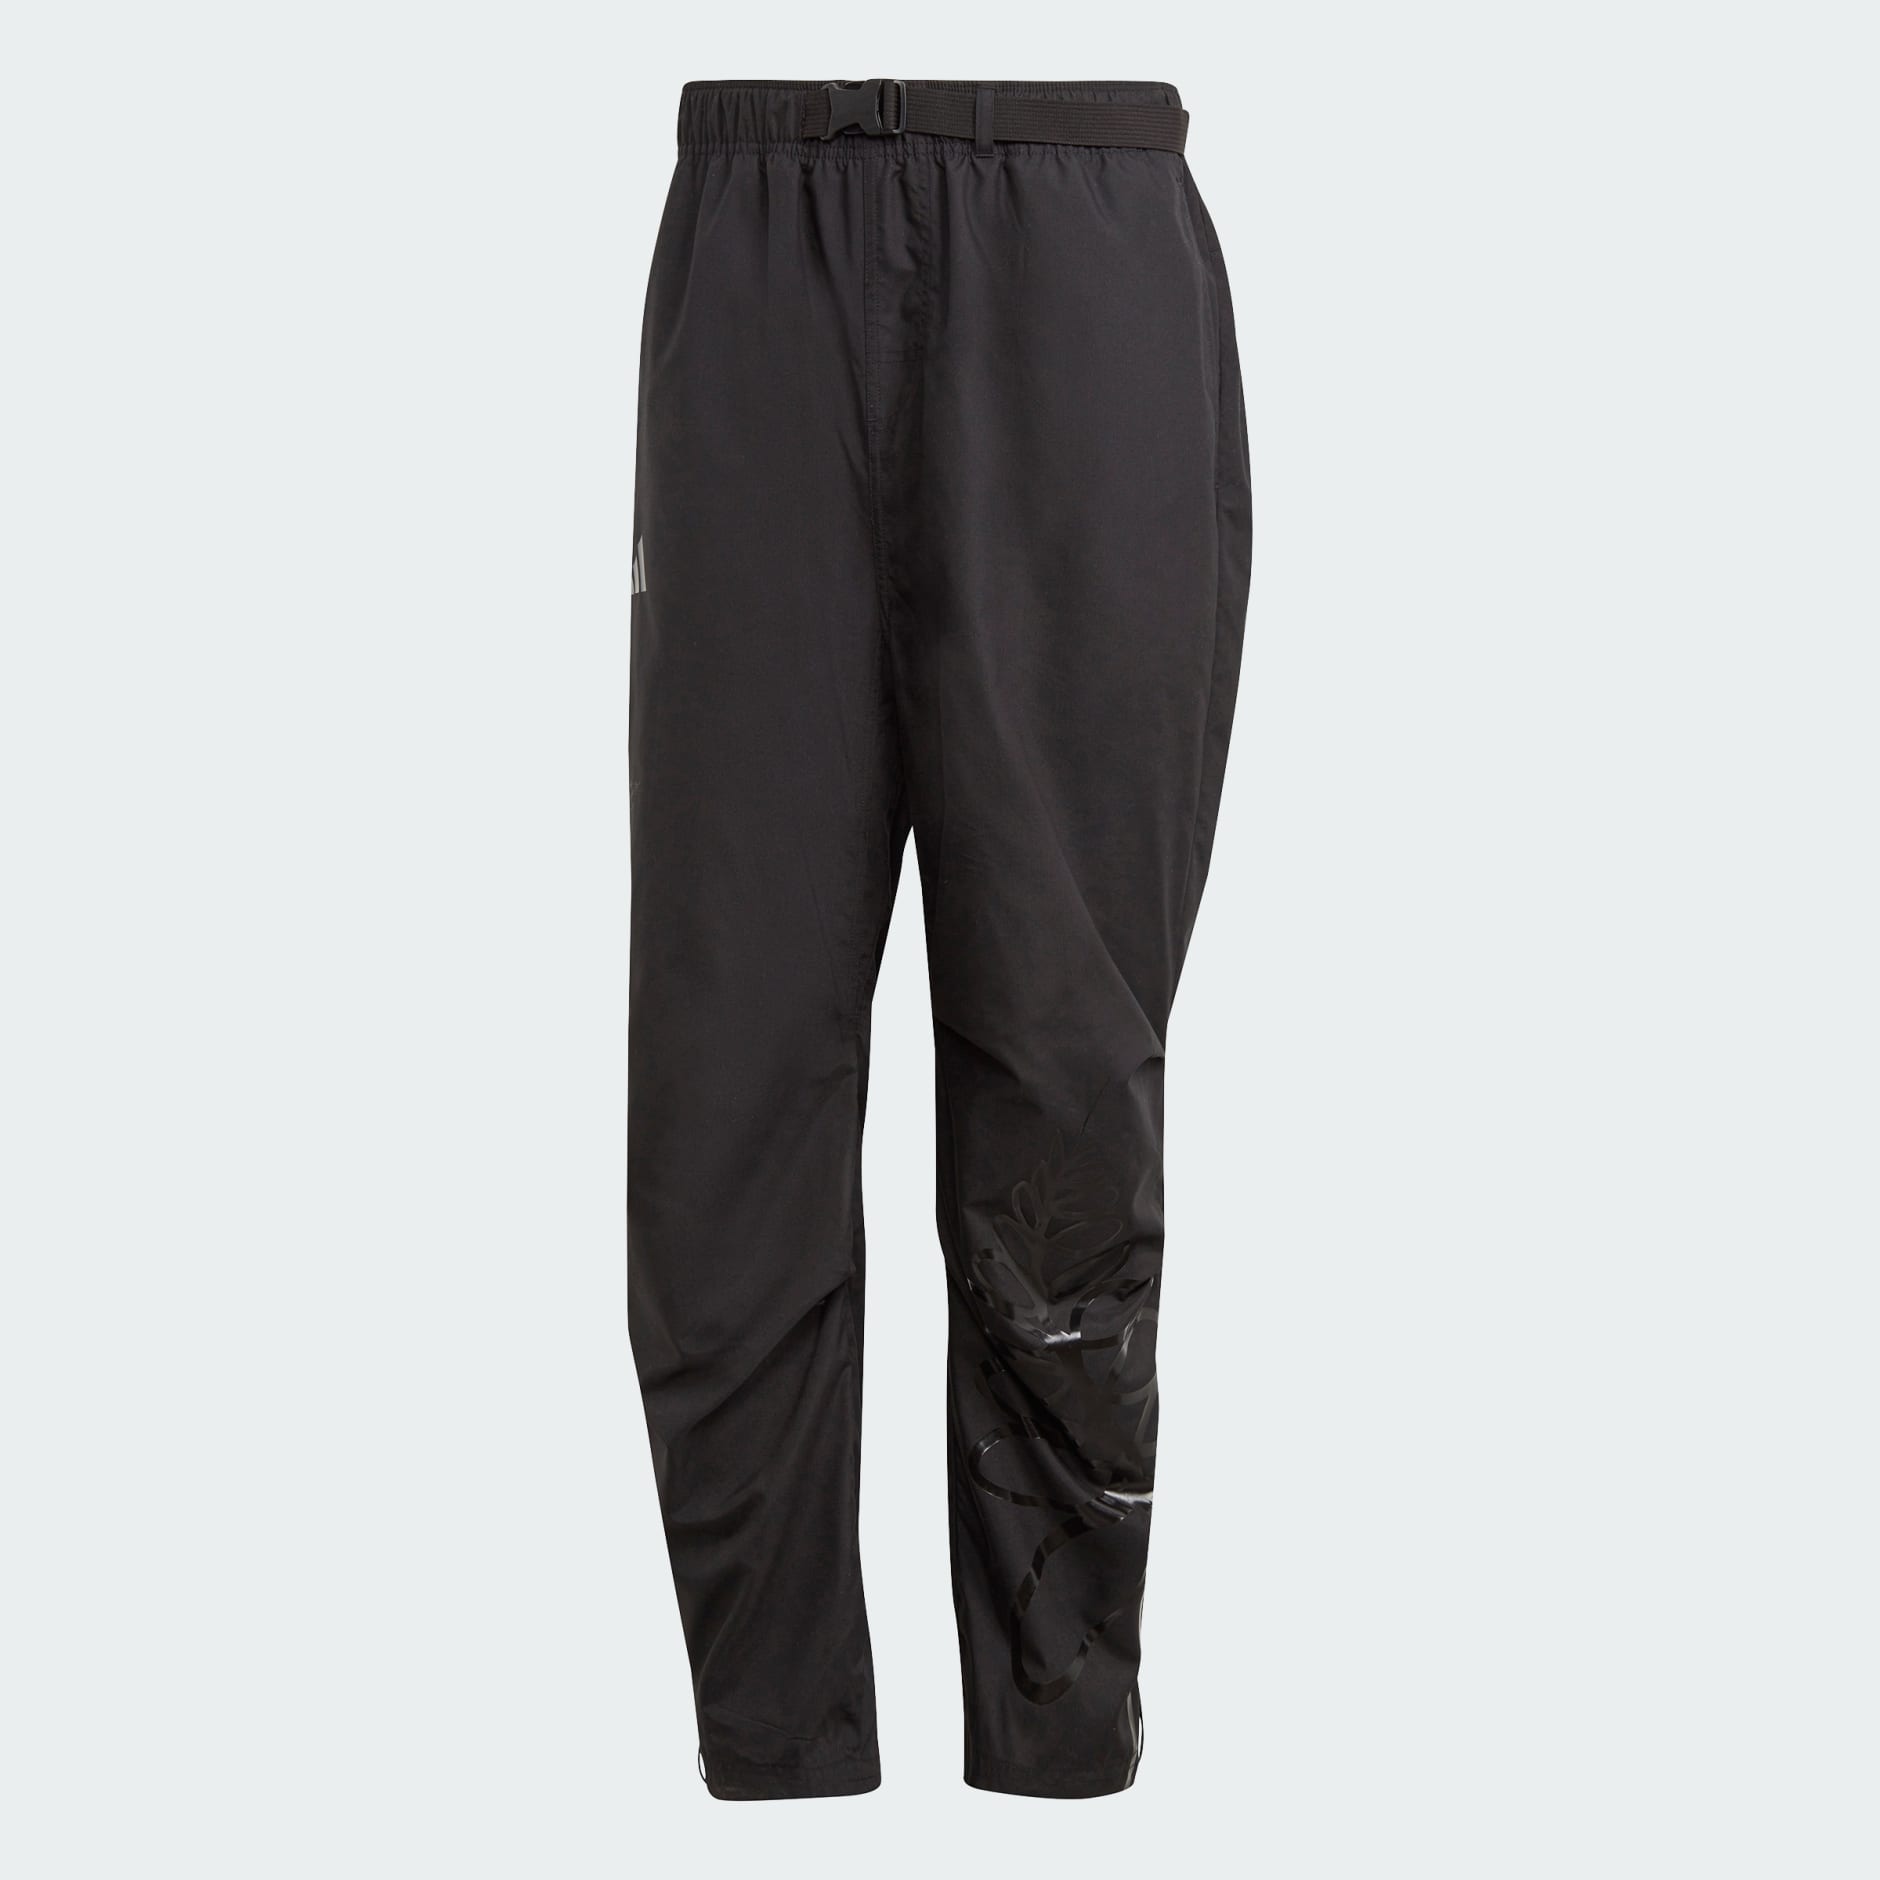 Clothing - All Blacks Rugby Lifestyle Tapered Cuff Pants - Black ...